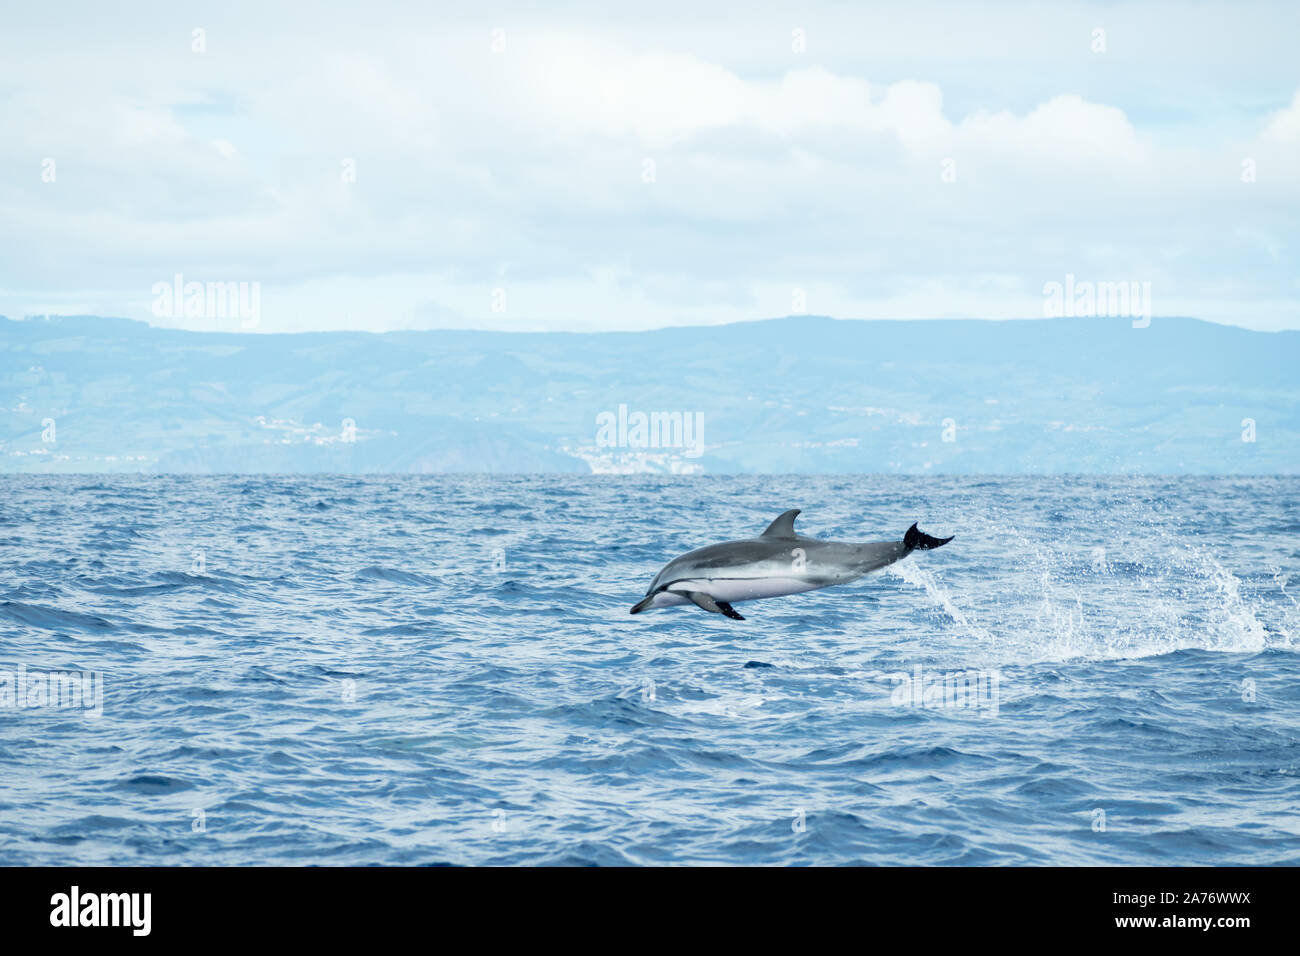 A Striped Dolphin (Stenella coeruleoalba) leaps out of the water in the Atlantic Ocean off the coast of Pico Island in the Azores archipelago. Stock Photo